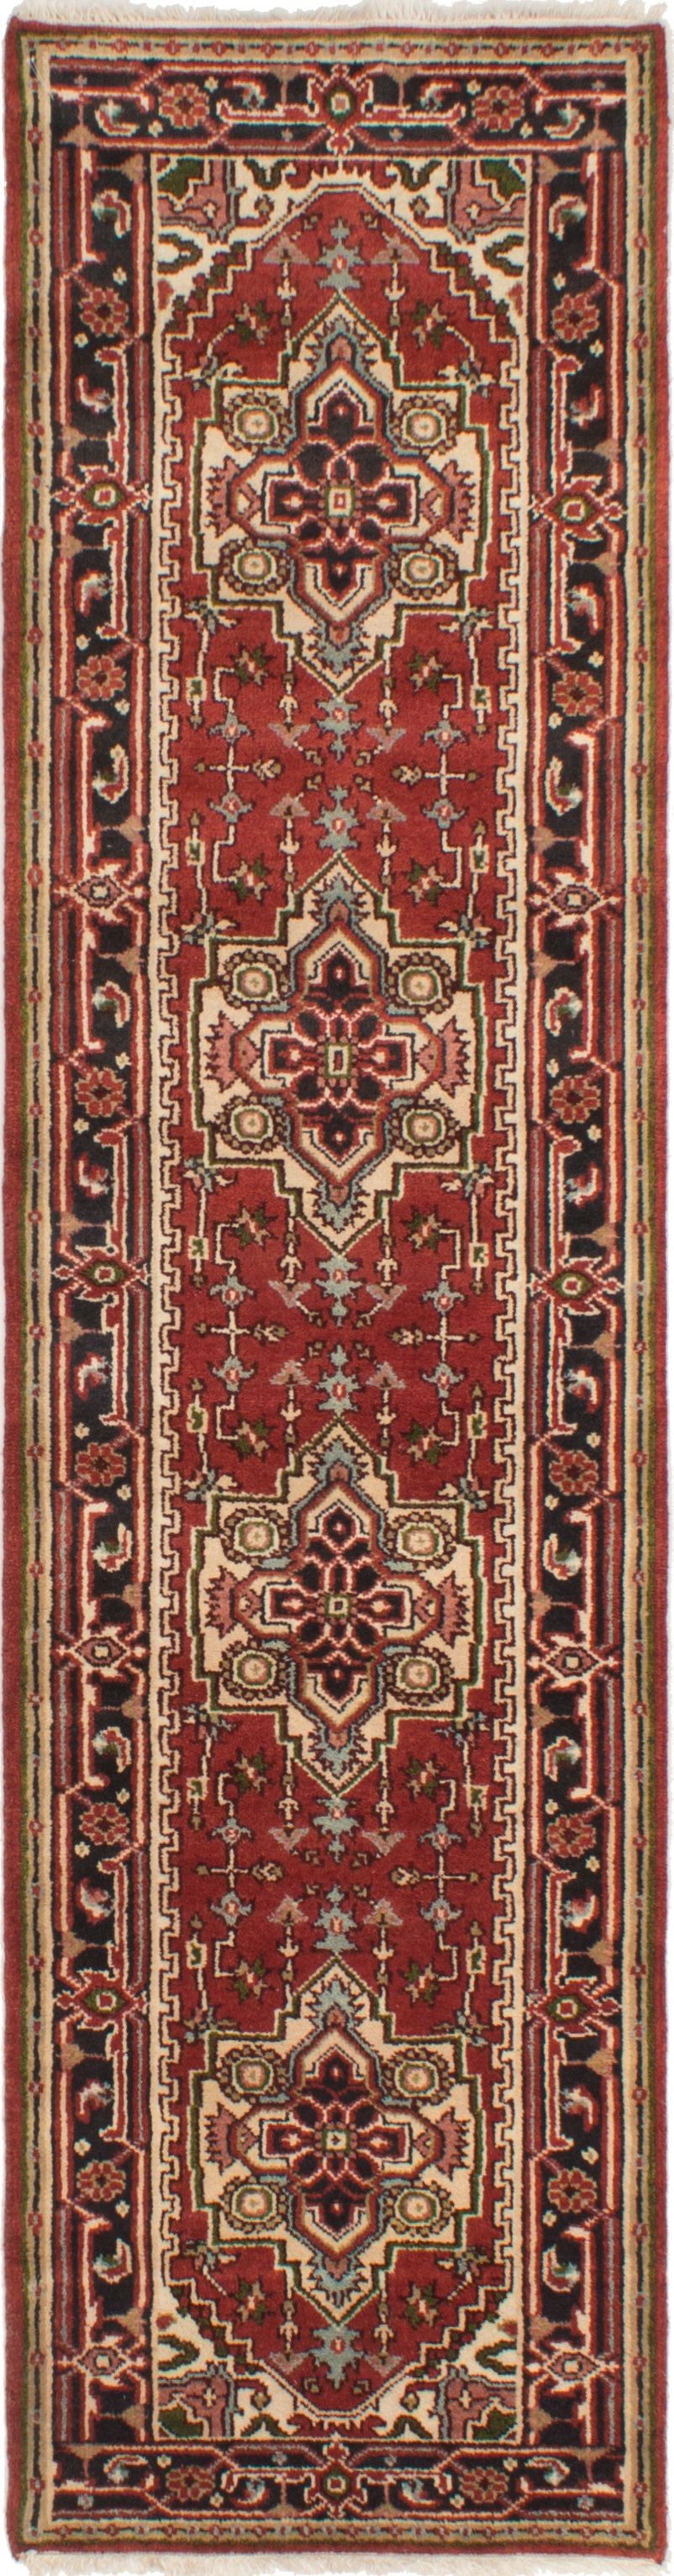 Hand-knotted Serapi Heritage Dark Red Wool Rug 2'7" x 10'3"  Size: 2'7" x 10'3"  